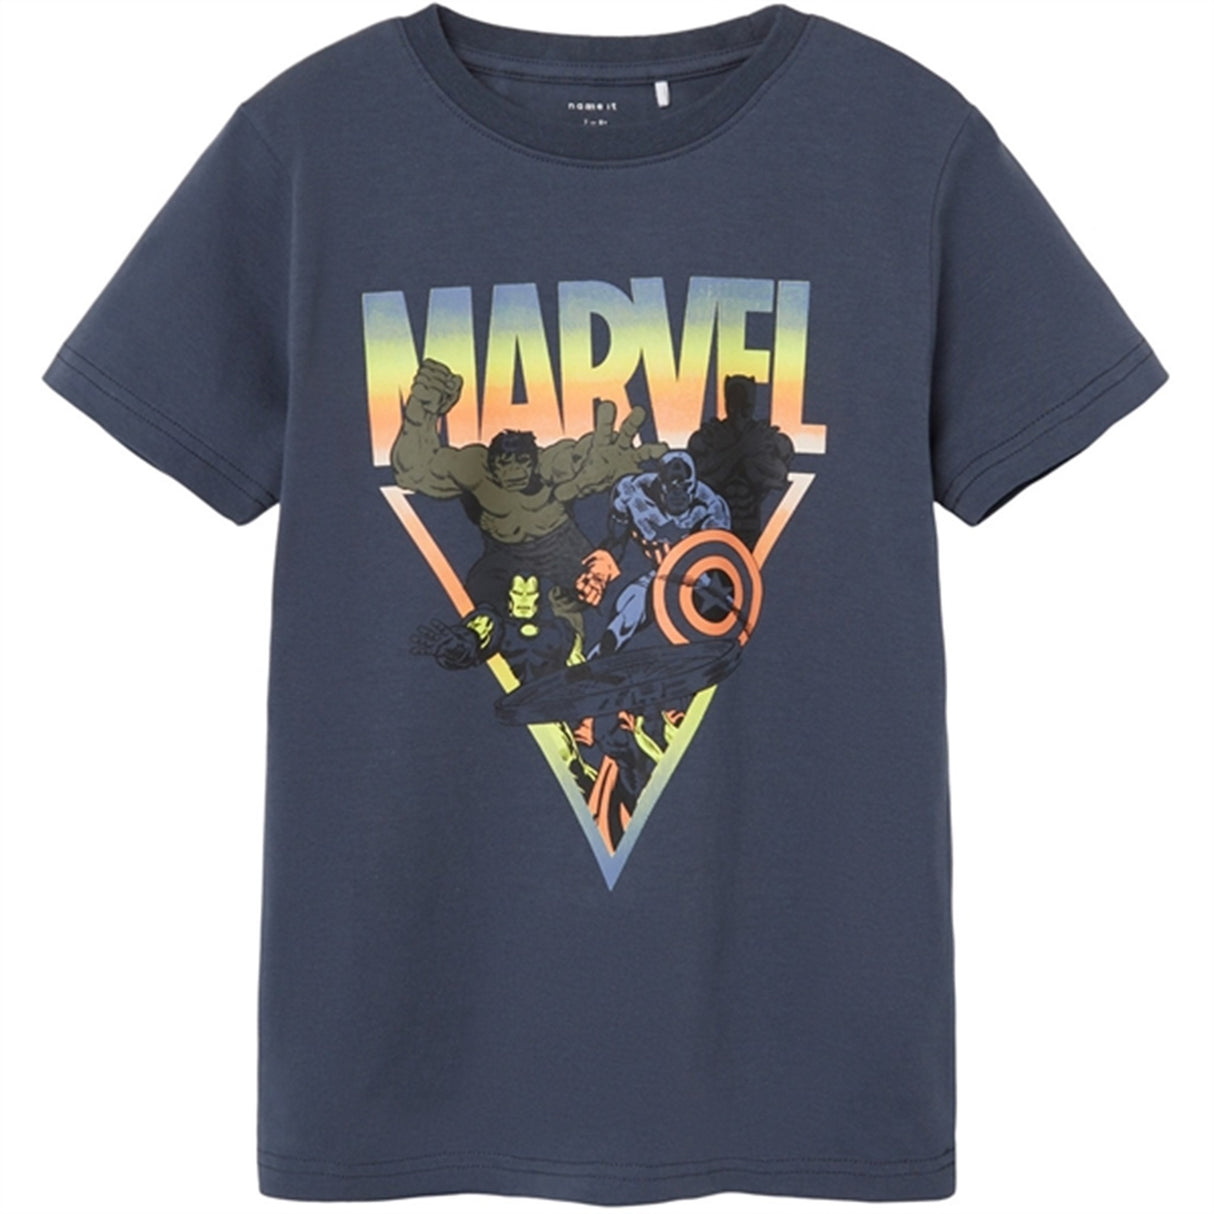 Name it India Ink Dominic Marvel T-Shirt